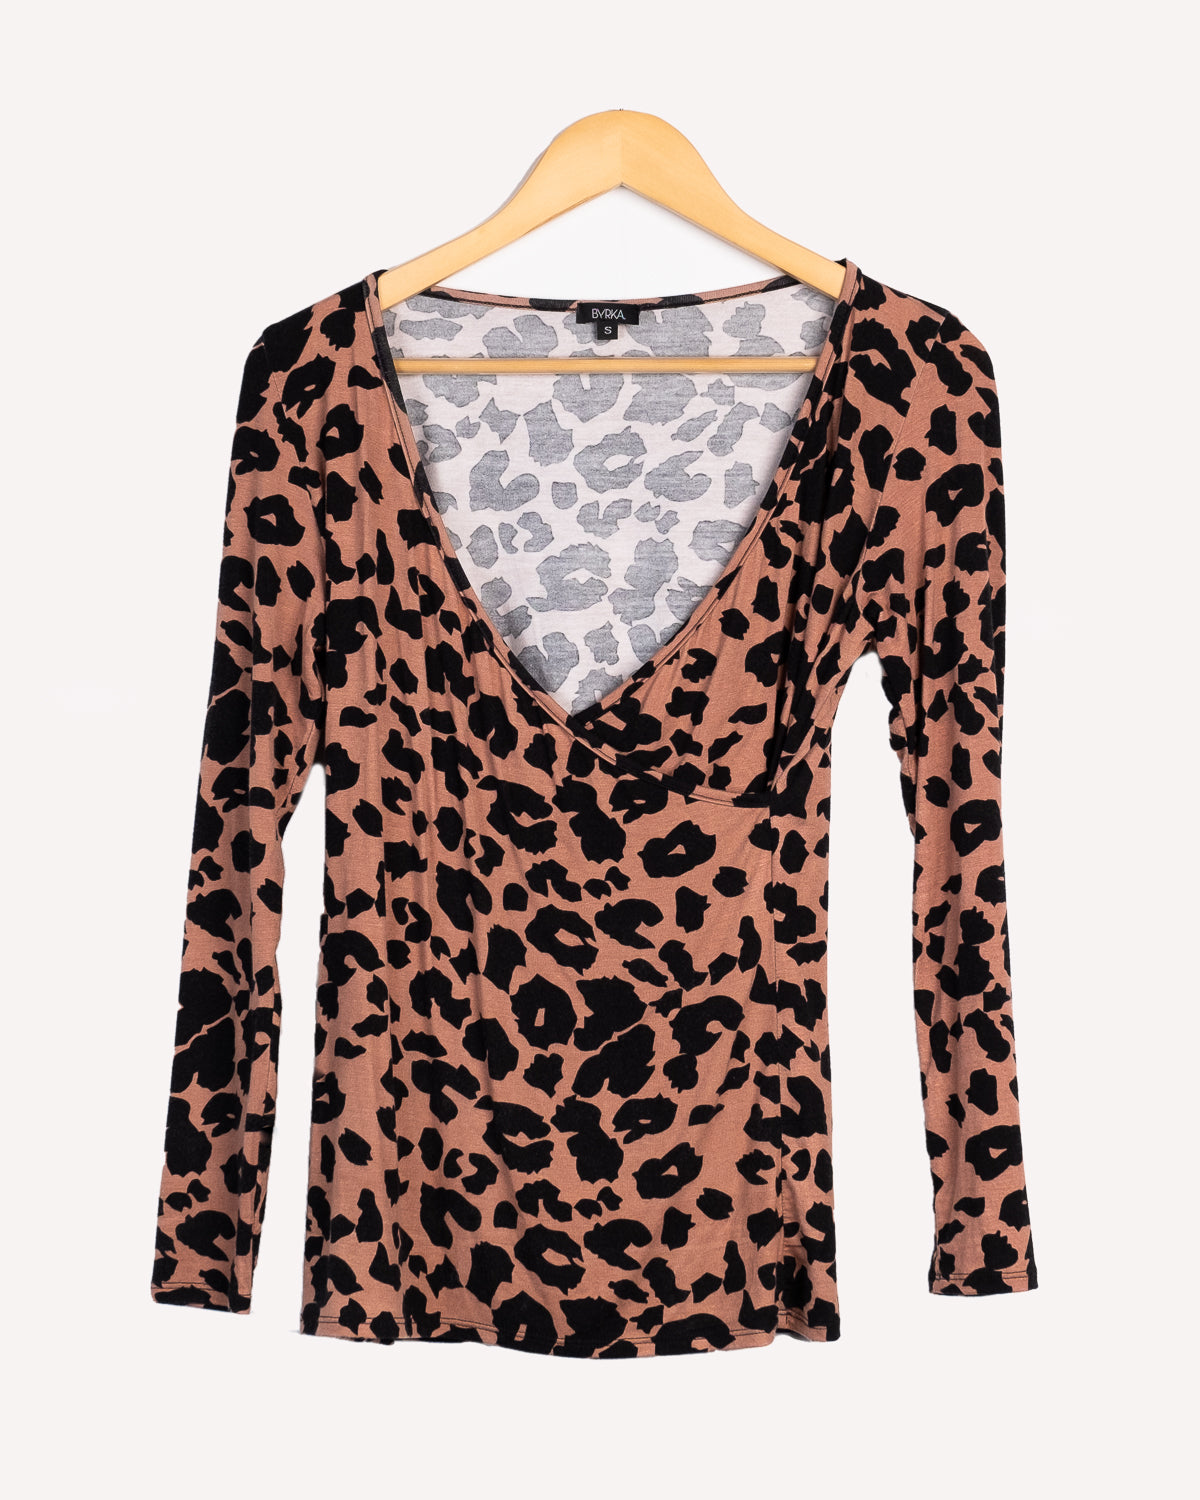 Women's Top with Crossed Neckline and Long Sleeves.